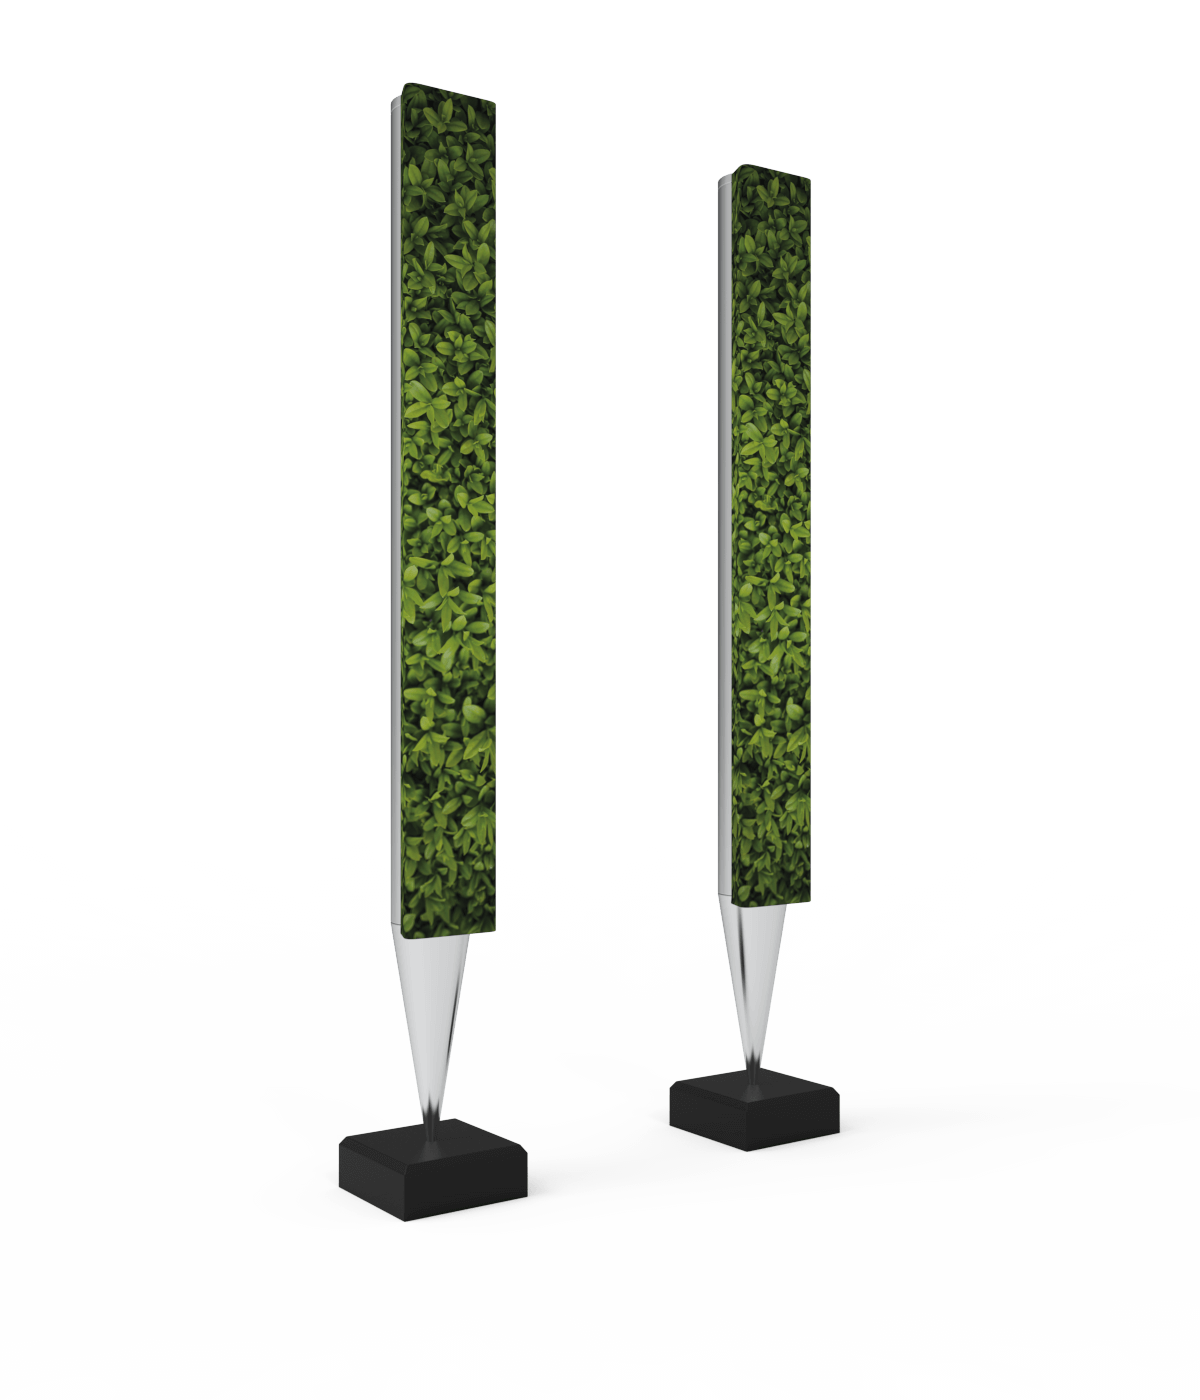 Skiniplay cover Plants for Bang & Olufsen Beolab 8000 speakers